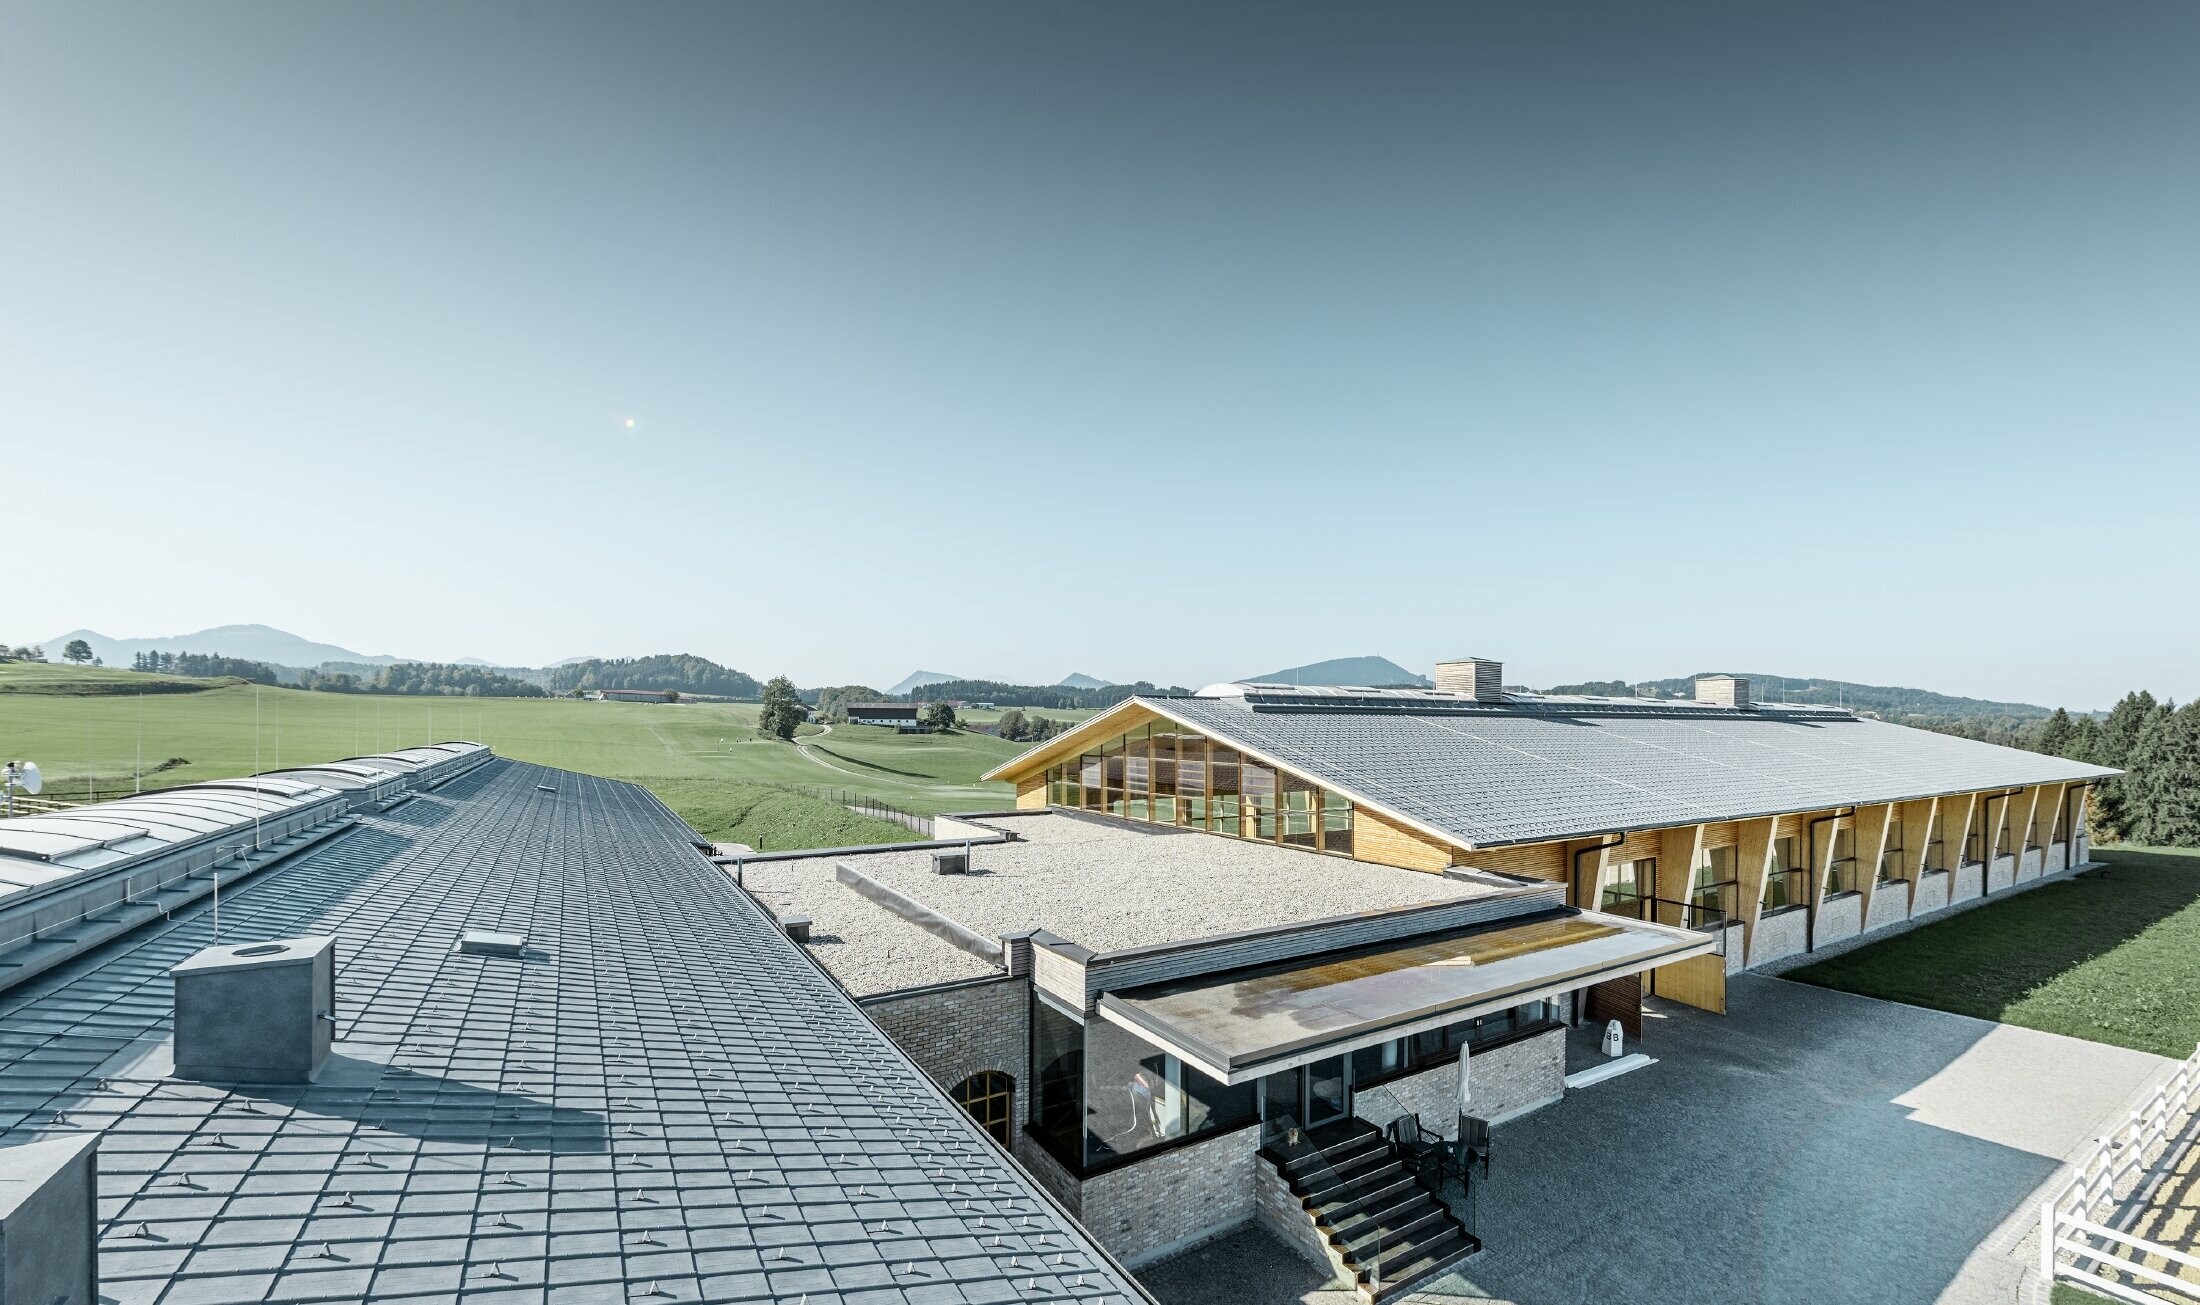 Stud farm in Thalgau with classic gabled roof covered with the PREFA roof tile in stone grey